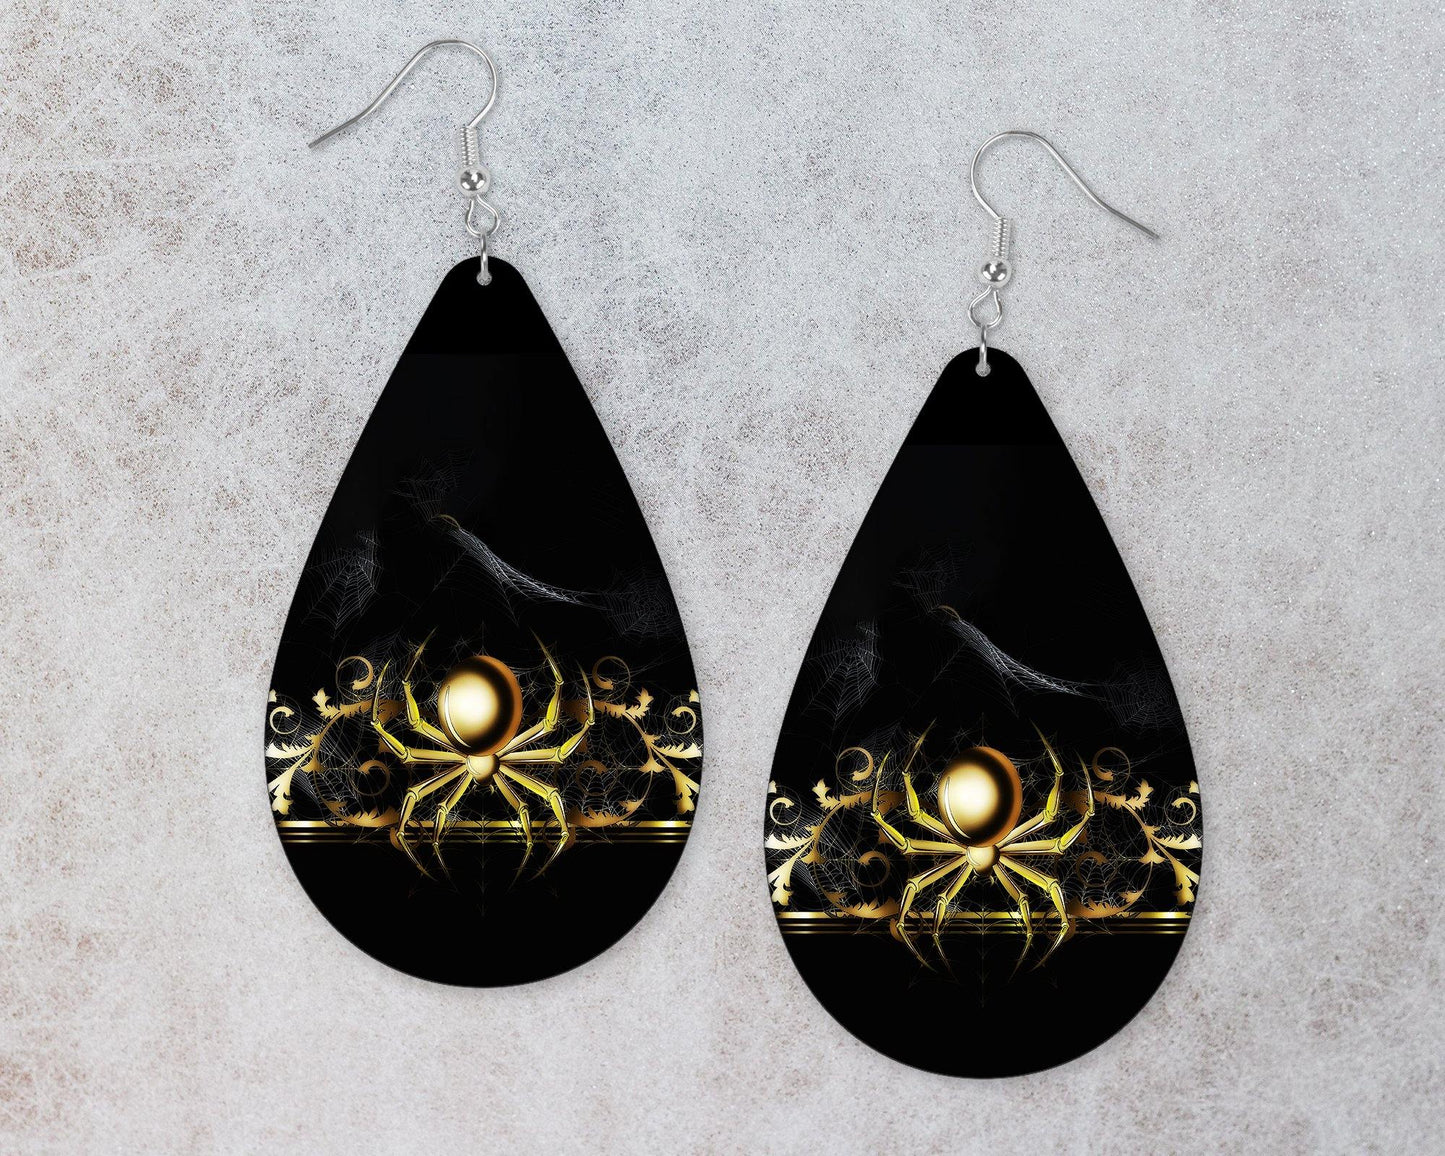 Gold Colored Spider Teardrop Earrings - Schoppix Gifts